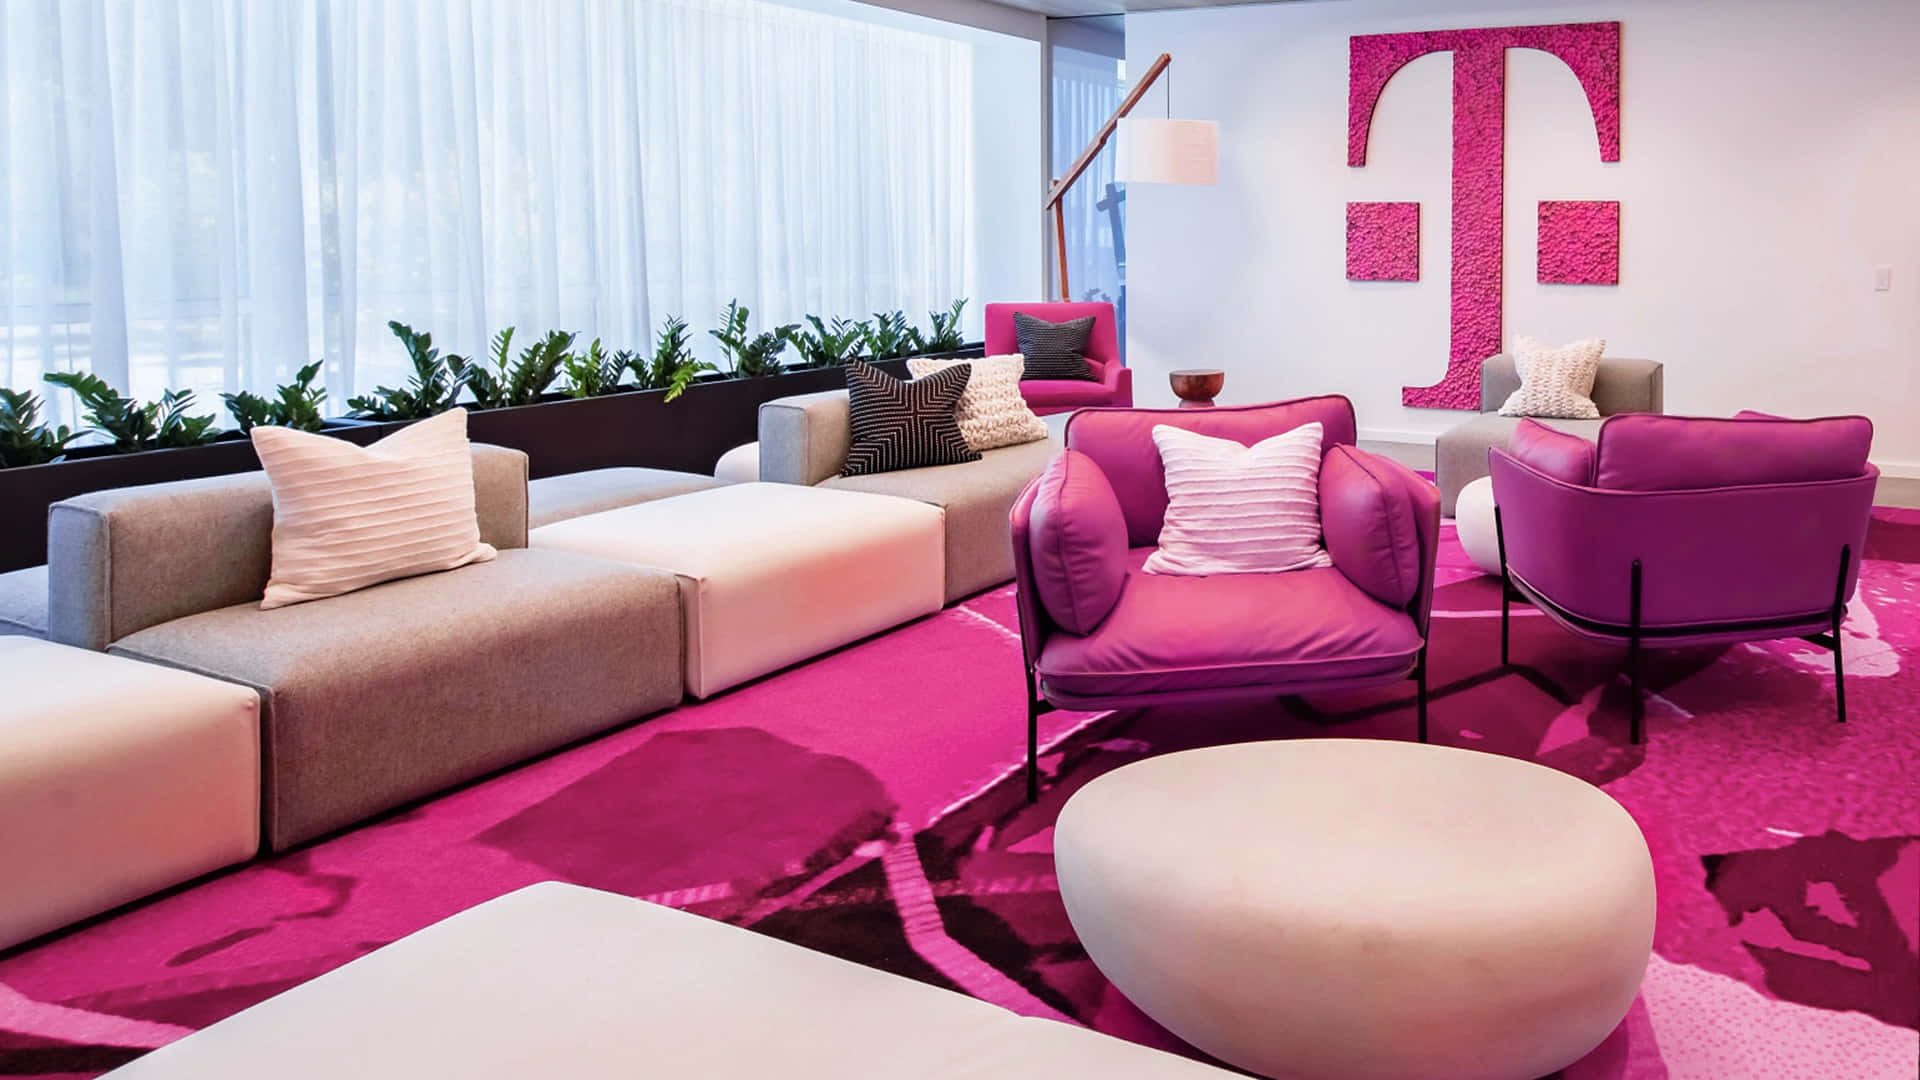 T Mobile's New Headquarters In San Francisco